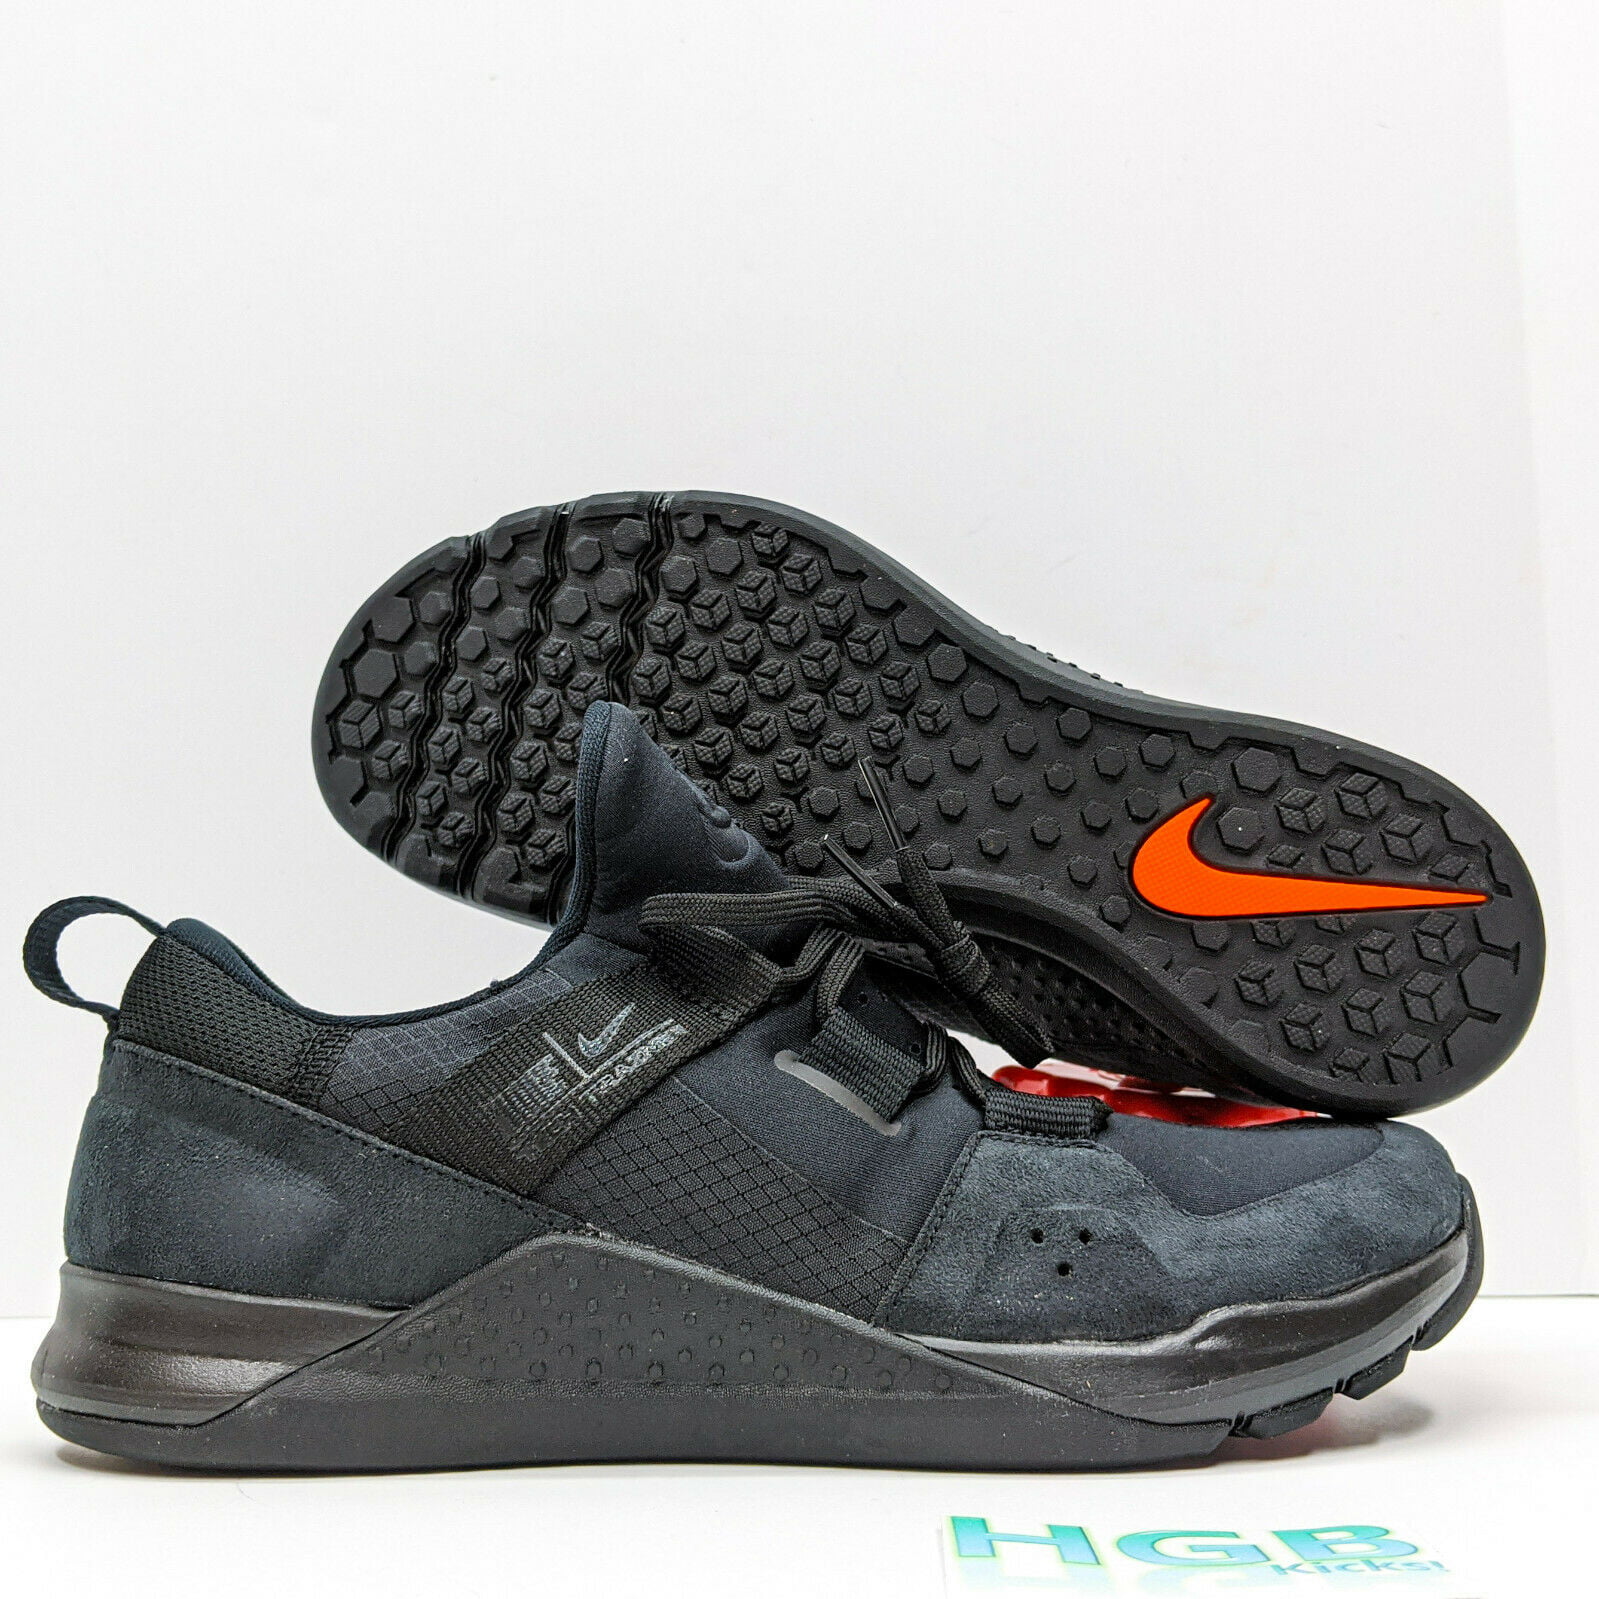 nike tech trainer review